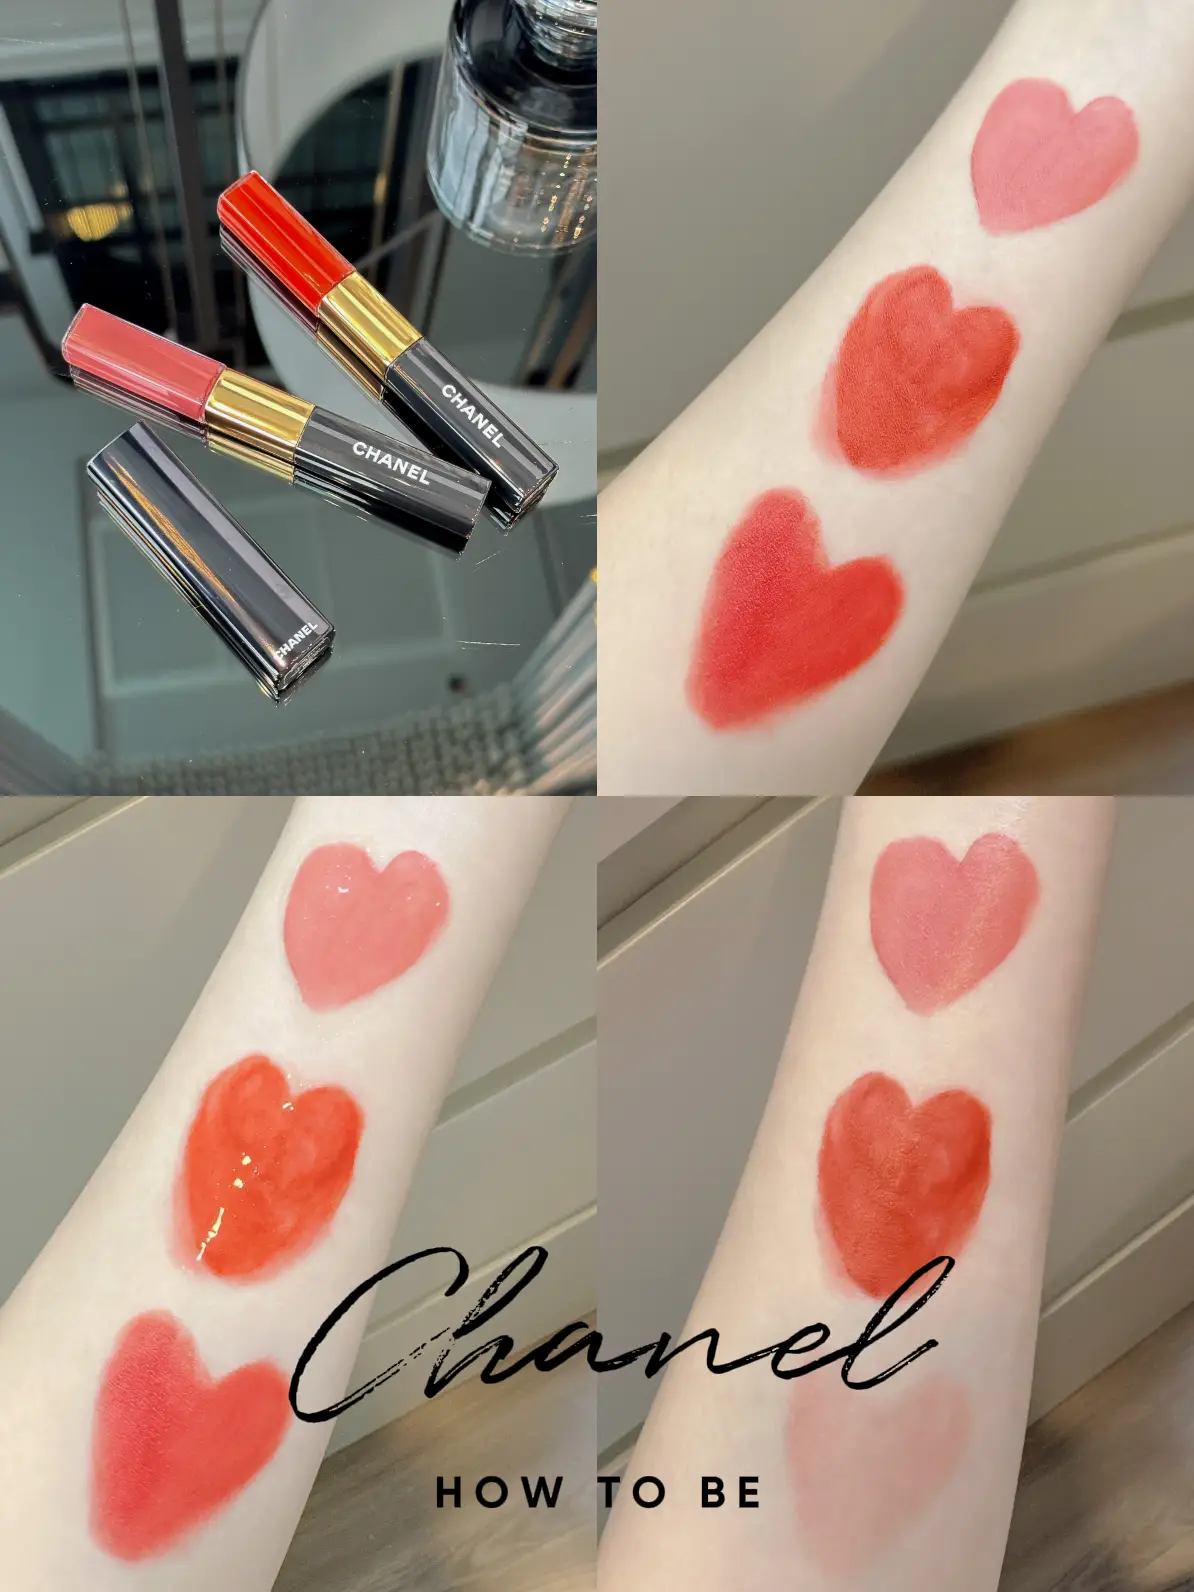 Review of Lip Chanel. Beautiful colors like shouting!💄